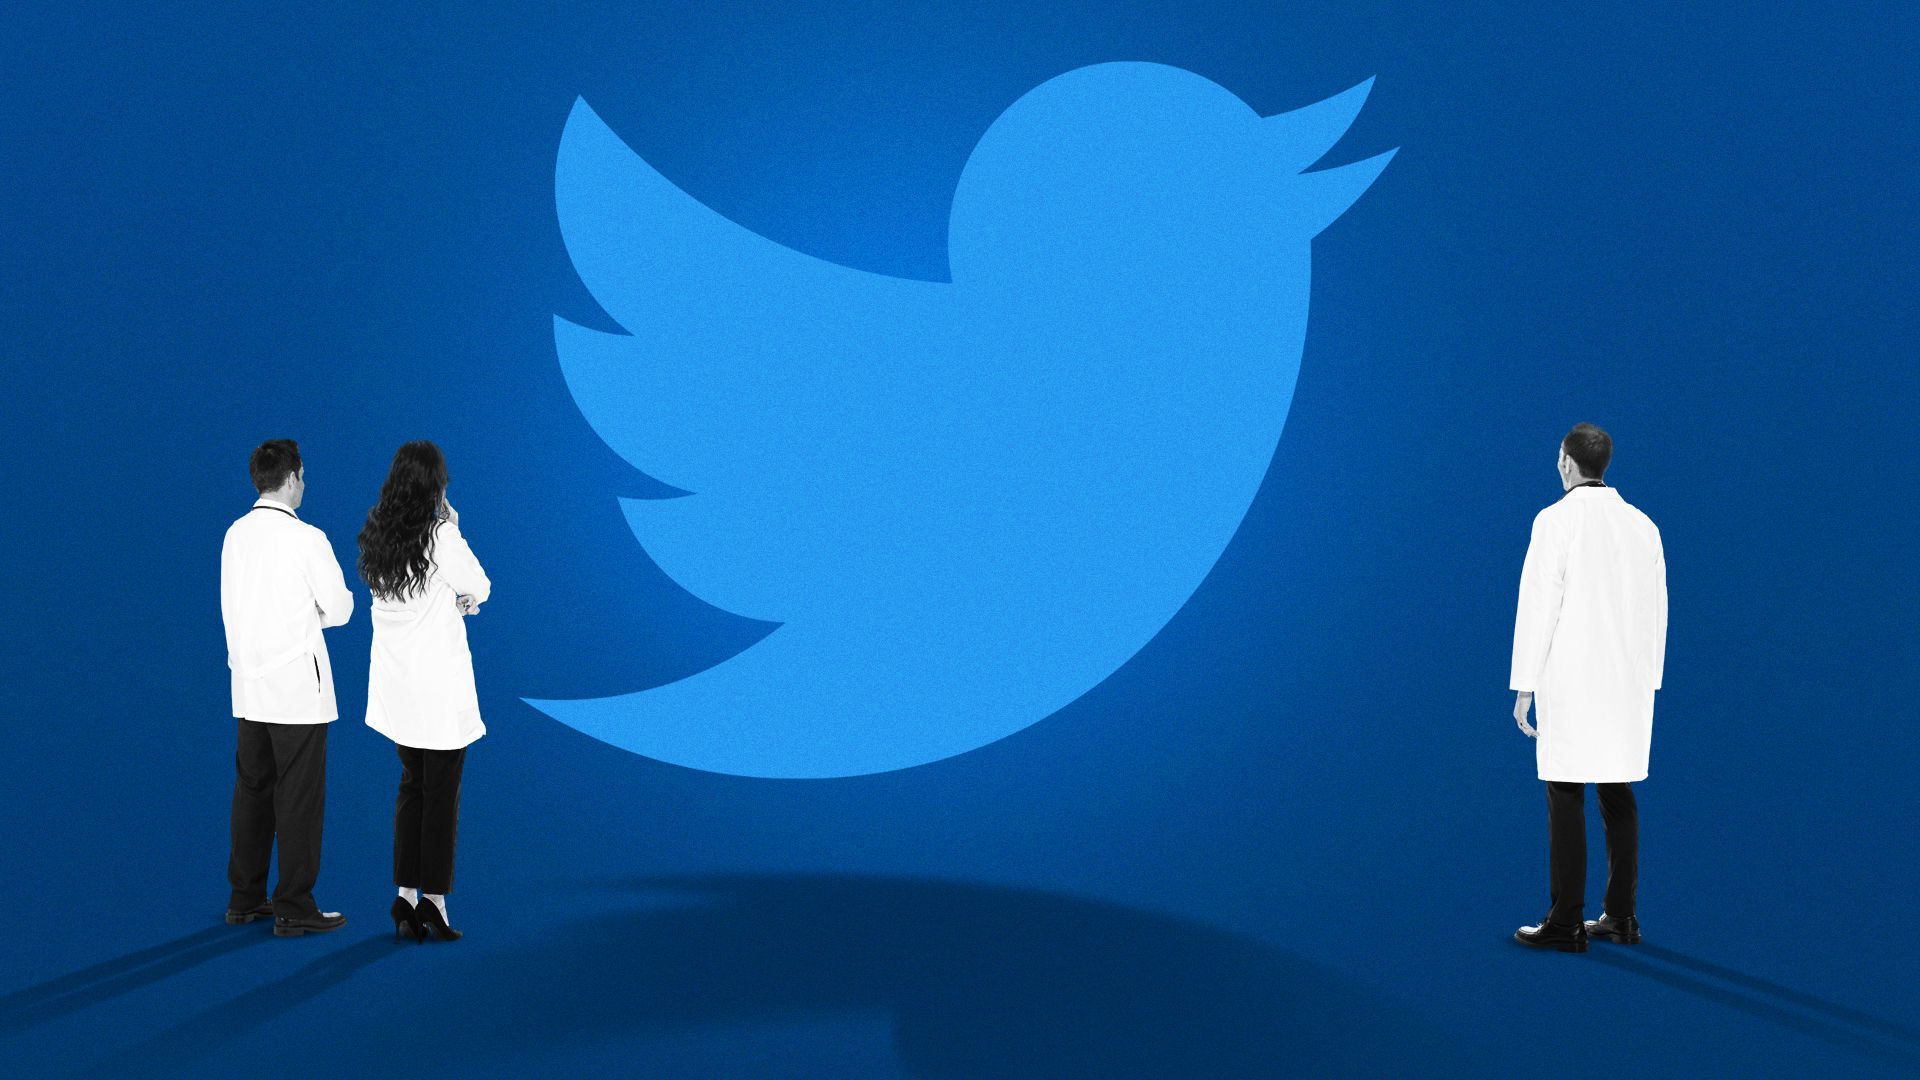 Scientists studying the twitter logo on a blue background.